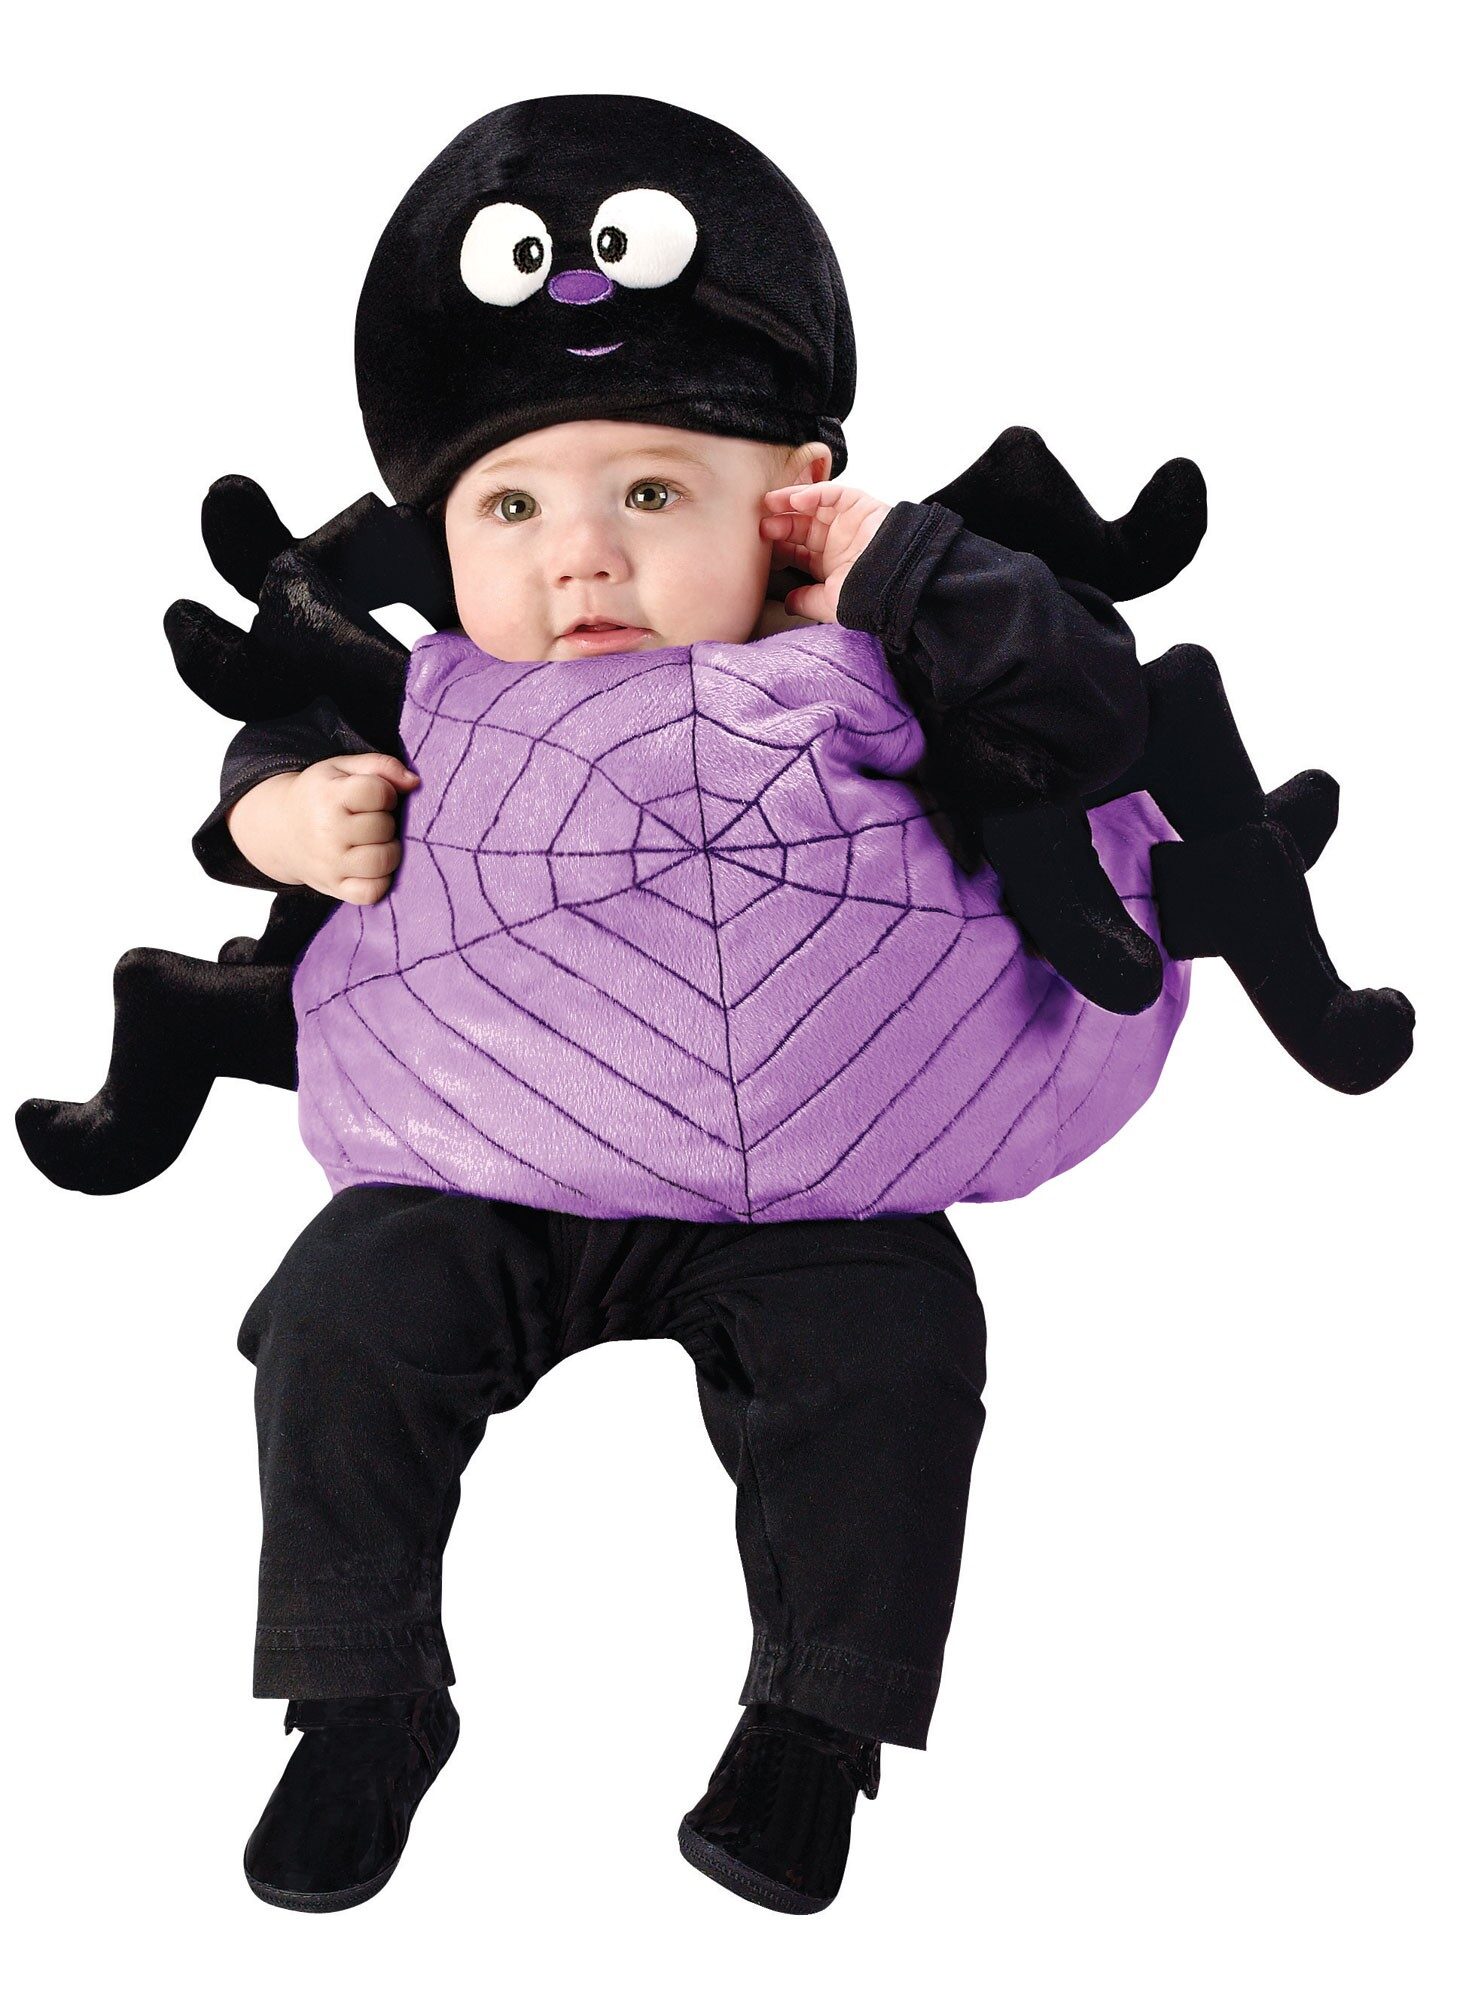 Itsy Bitsy Silly Spider Baby Costume - Mr. Costumes